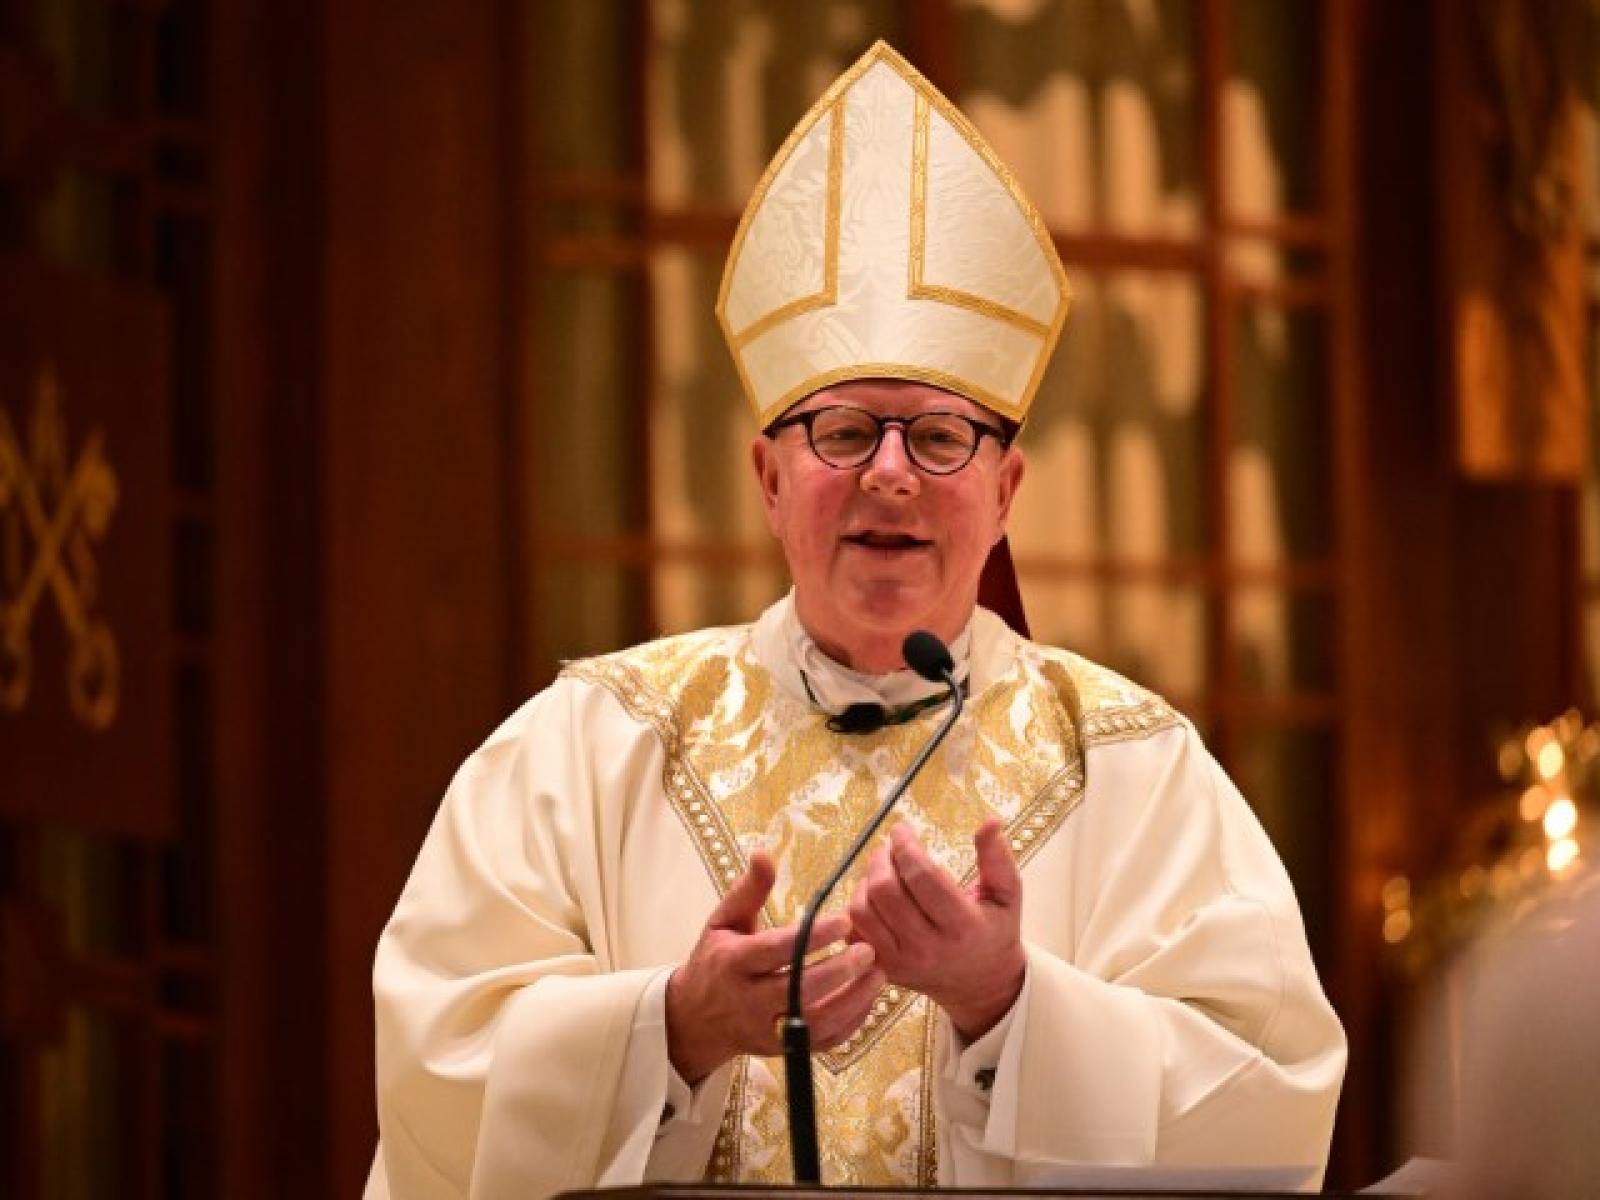 Bishop William D. Byrne, Bishop of the Diocese of Springfield, Massachusetts